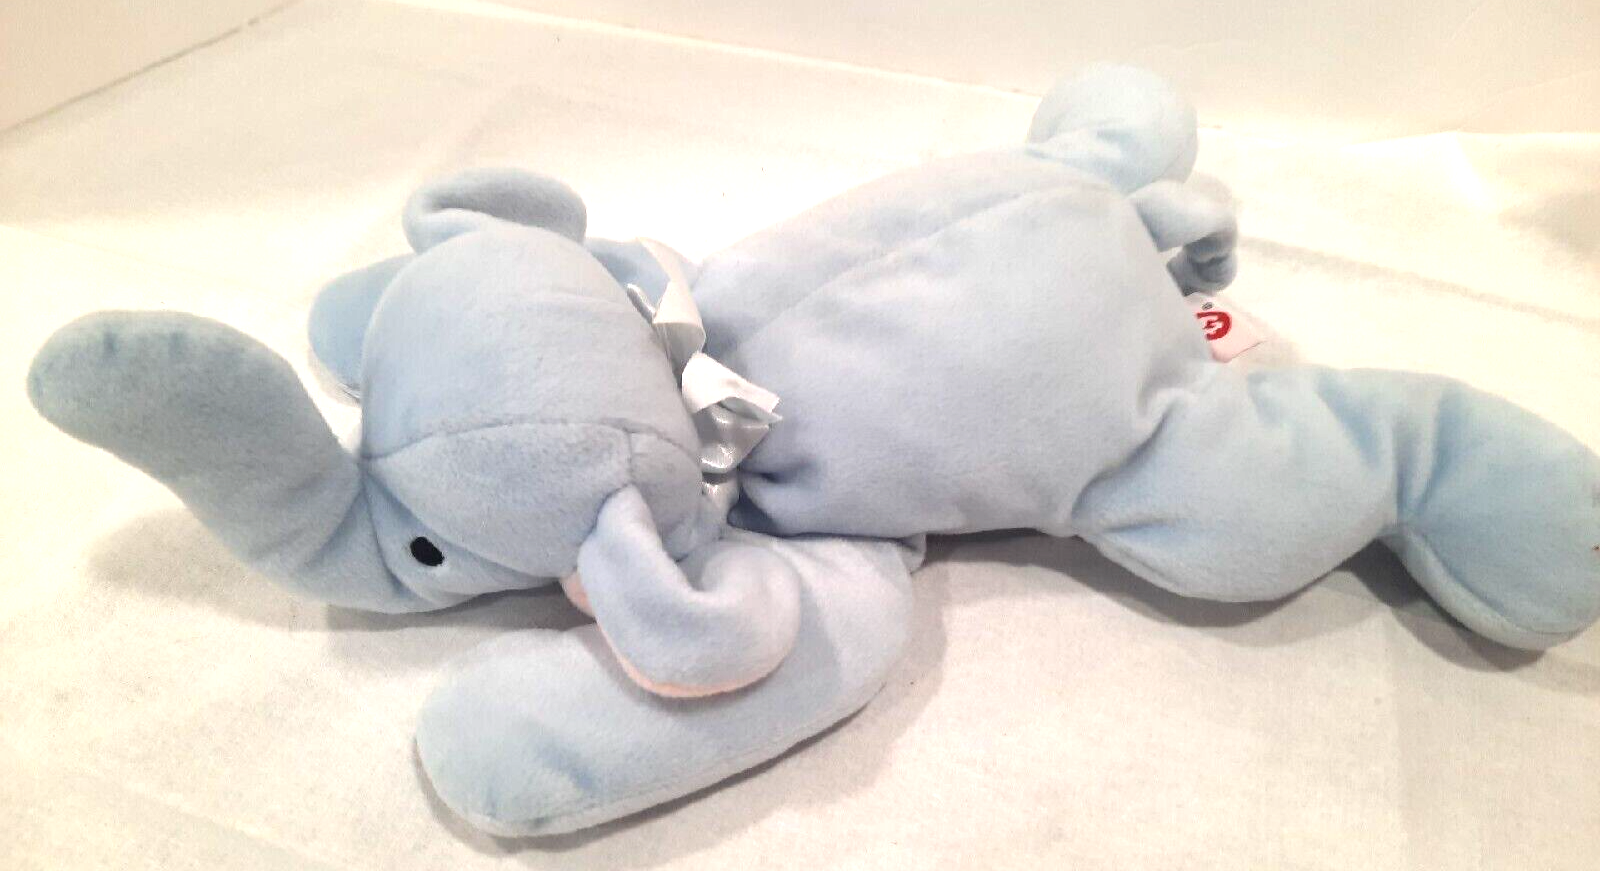 VTG 1996 Ty Squirt the Elephant 15” Plush Pillow Pal Stuffed Animal Collection - $8.51